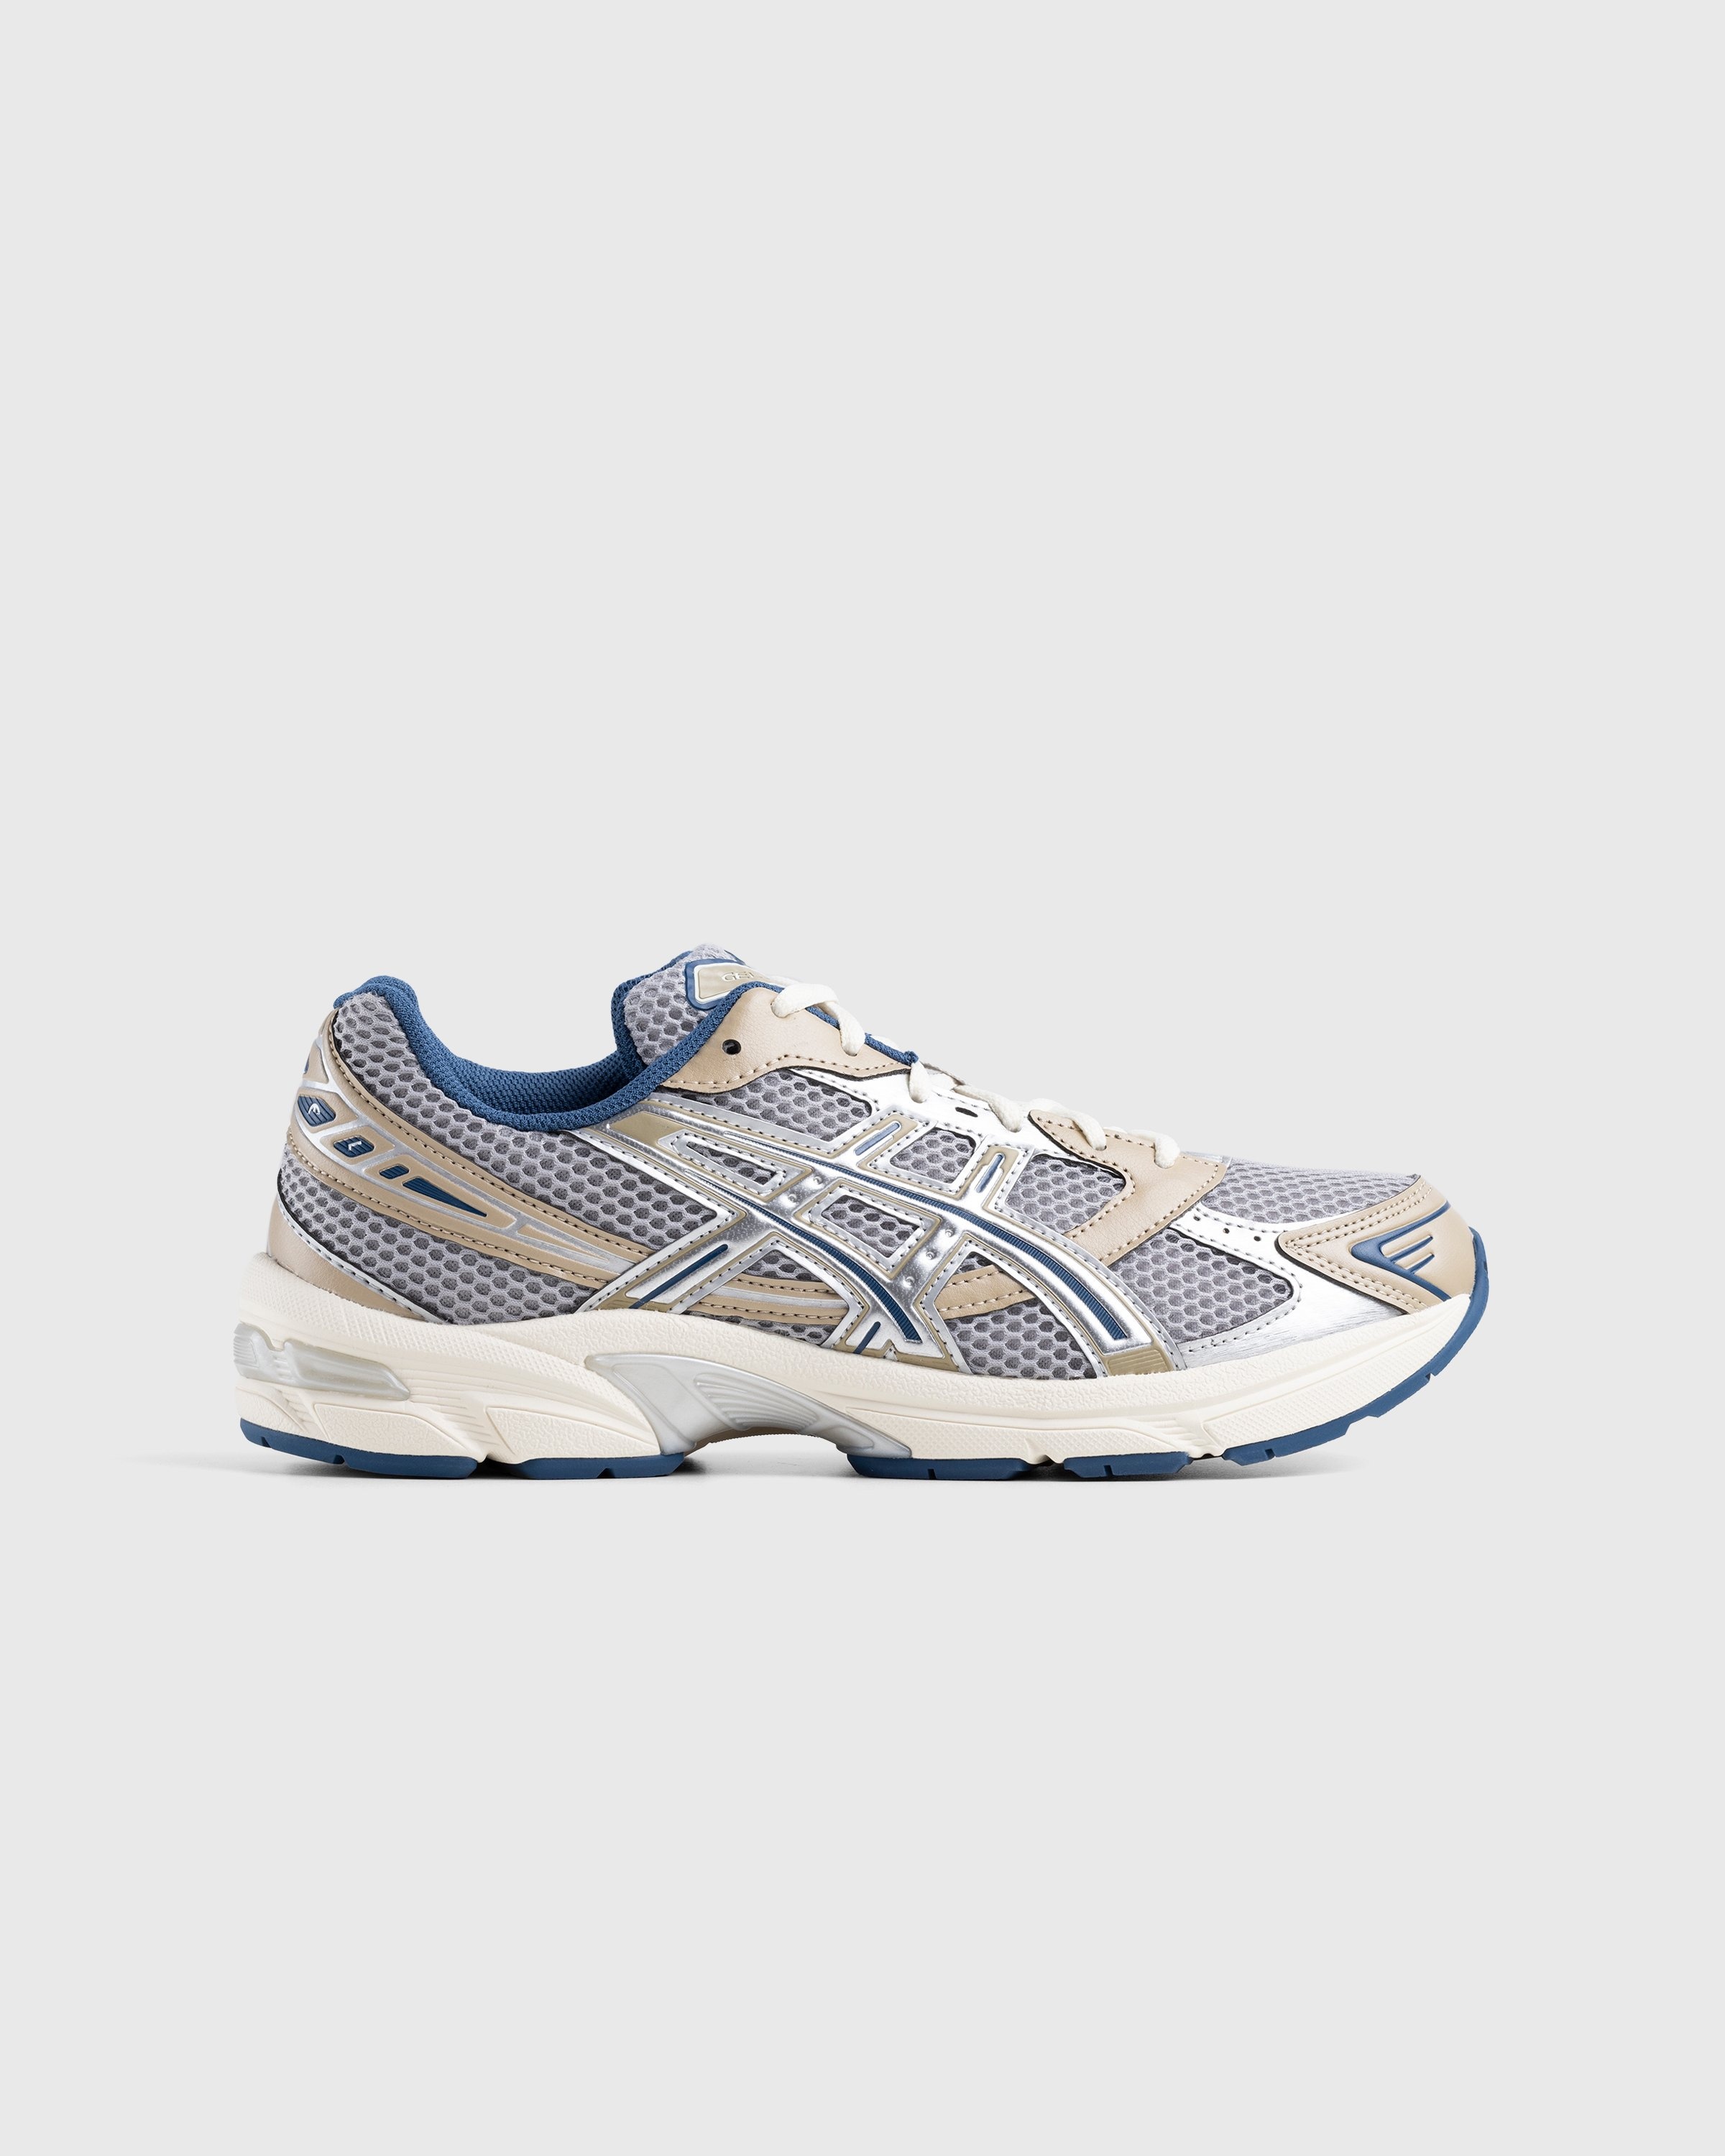 asics – Gel-1130 Oyster Grey Pure Silver - Sneakers - Beige - Image 1